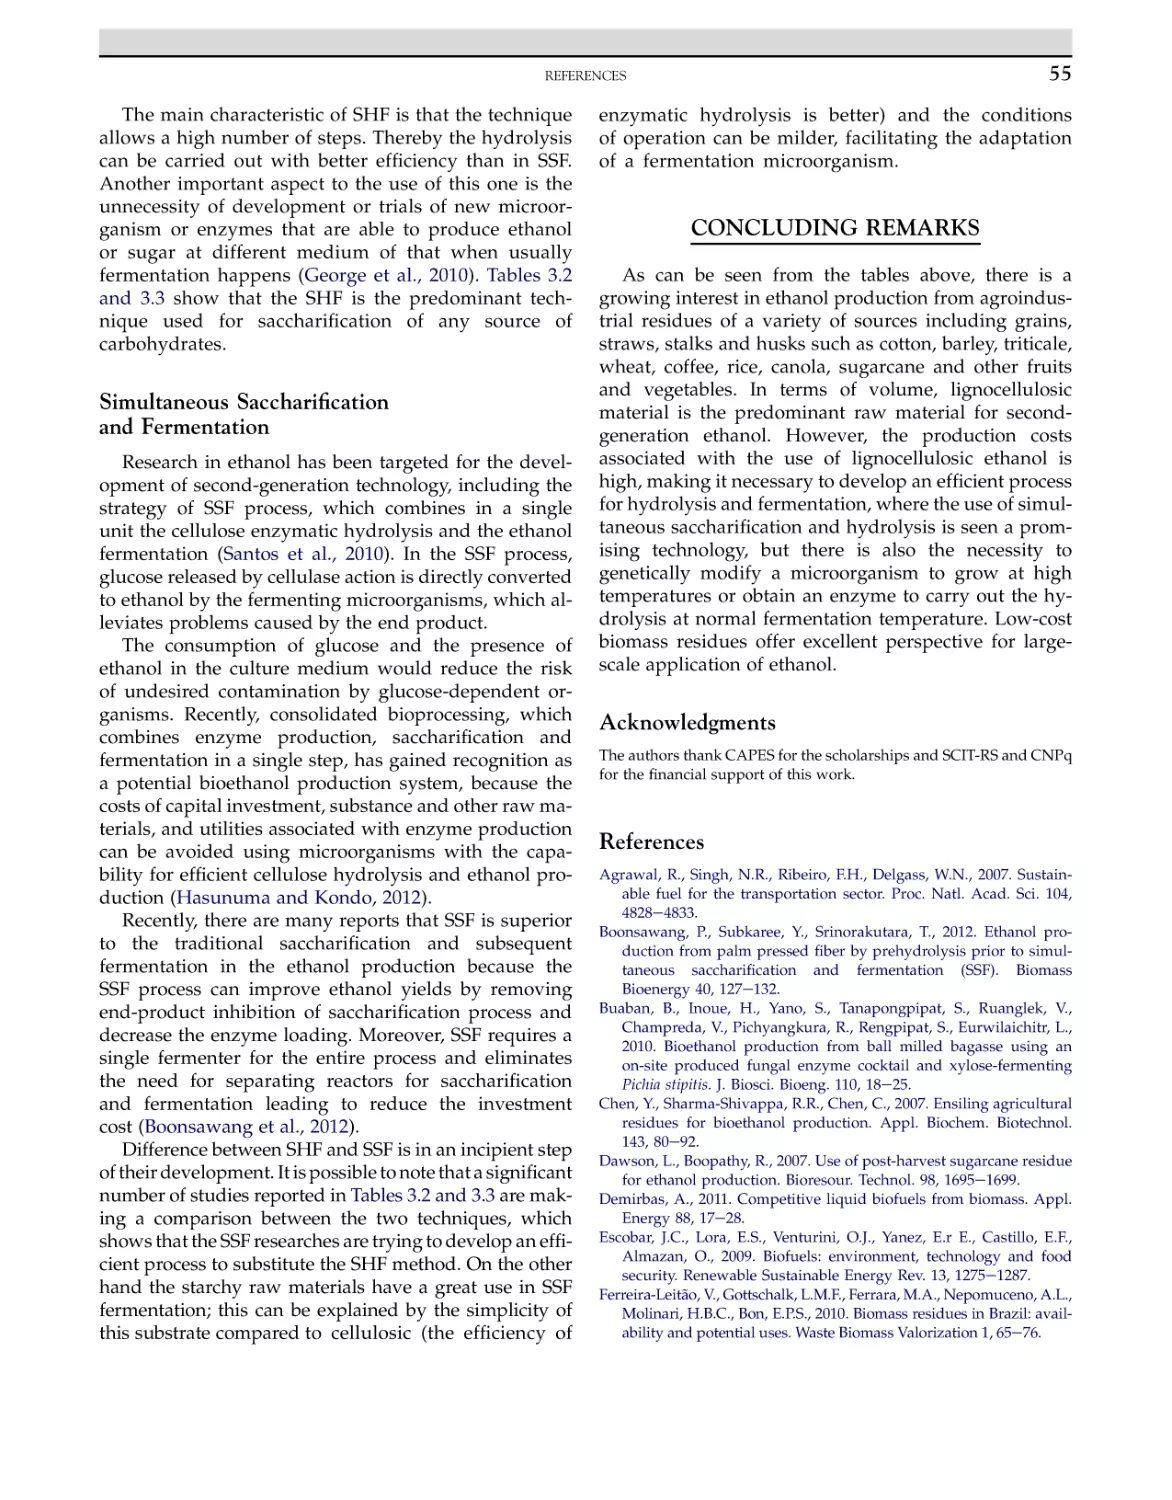 Simultaneous Saccharification and Fermentation
Concluding Remarks
Acknowledgments
References